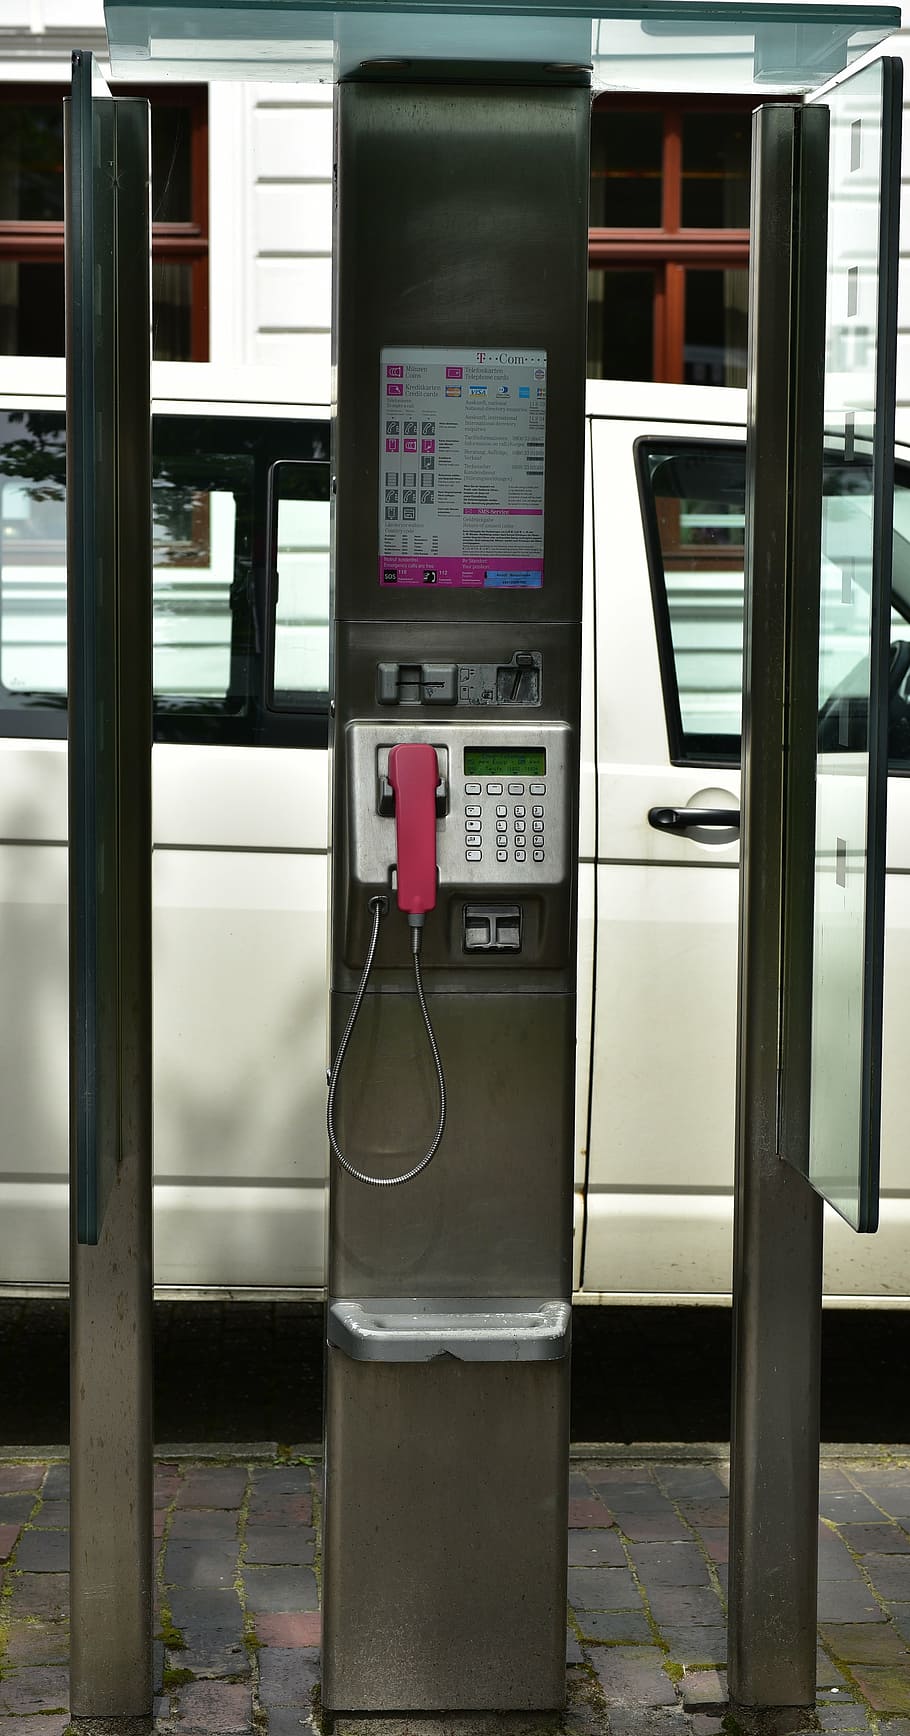 phone booth, telekom, call, coin-operated, city, technology, telephone booth, telephone, communication, pay phone